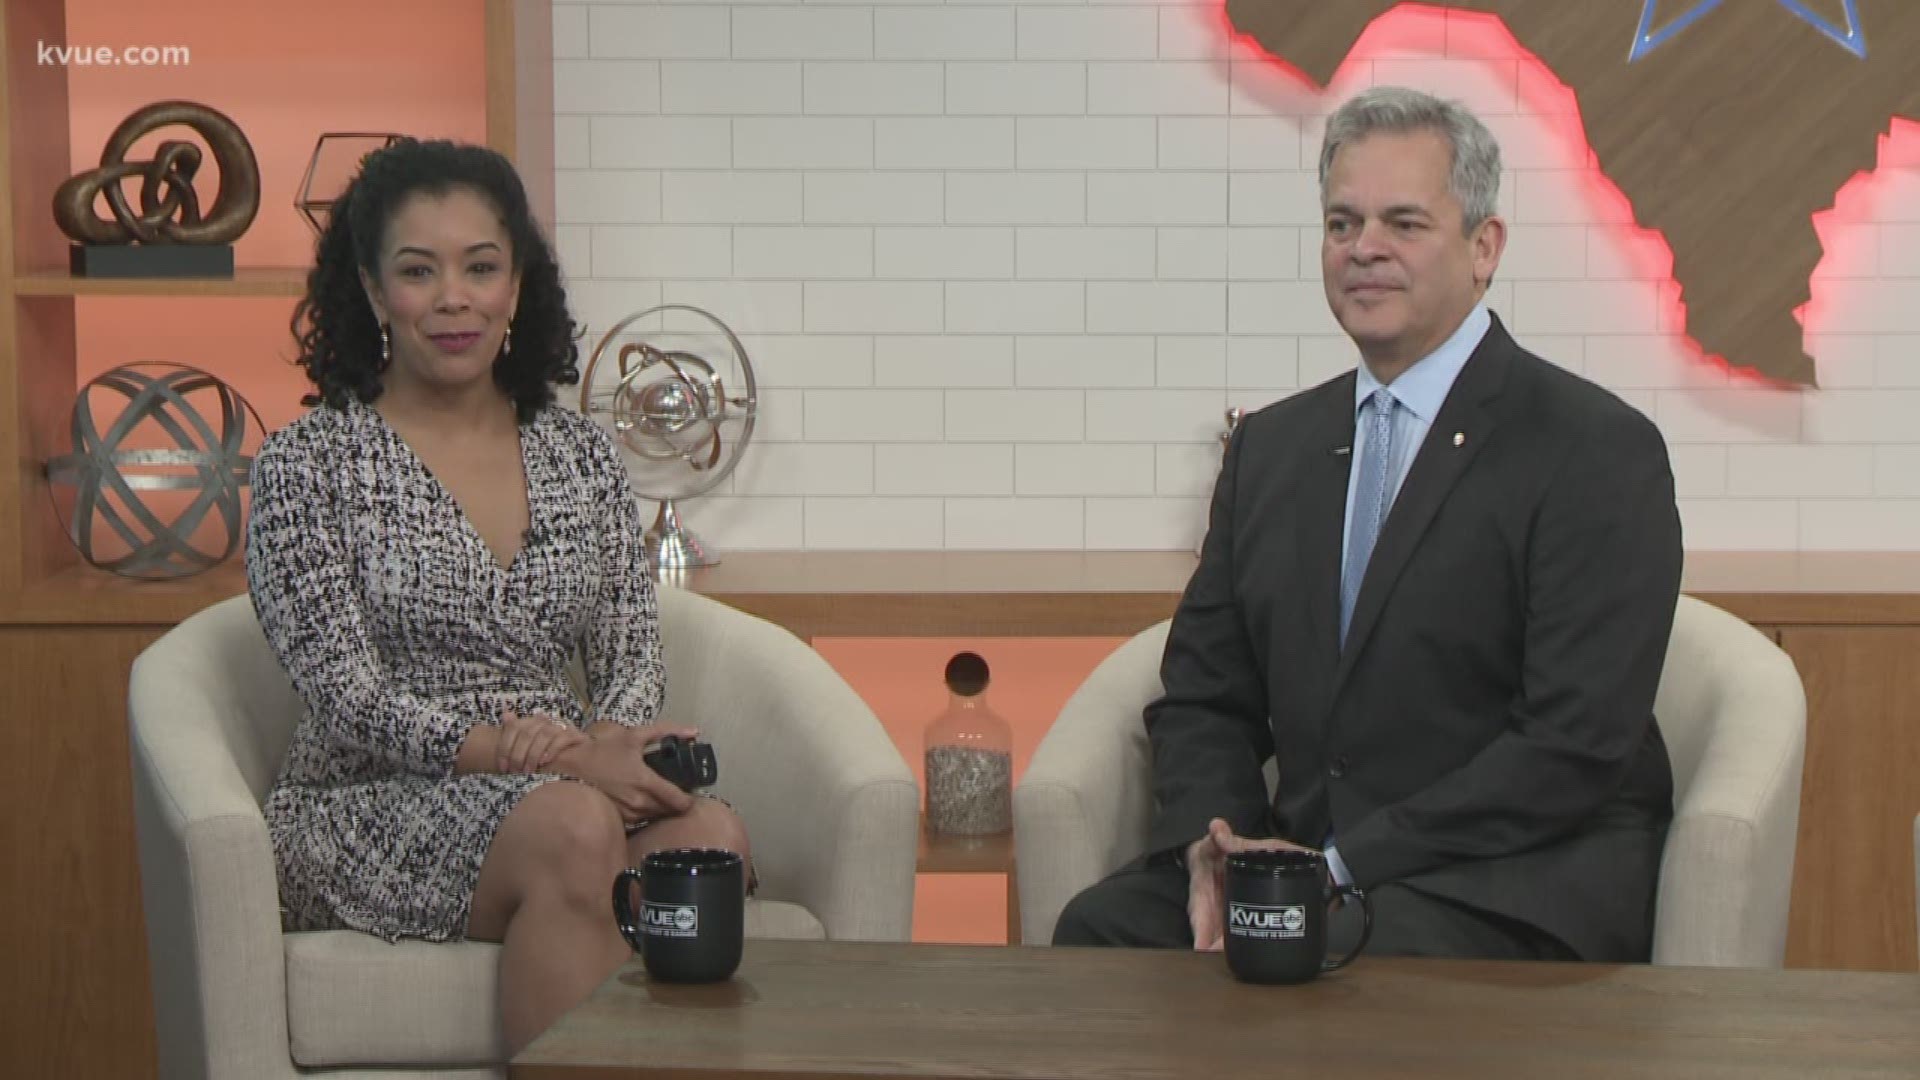 Austin Mayor Steve Adler joins us at KVUE for his weekly visit. He discussed affordable housing, affordability unlocked and land development rewrite.